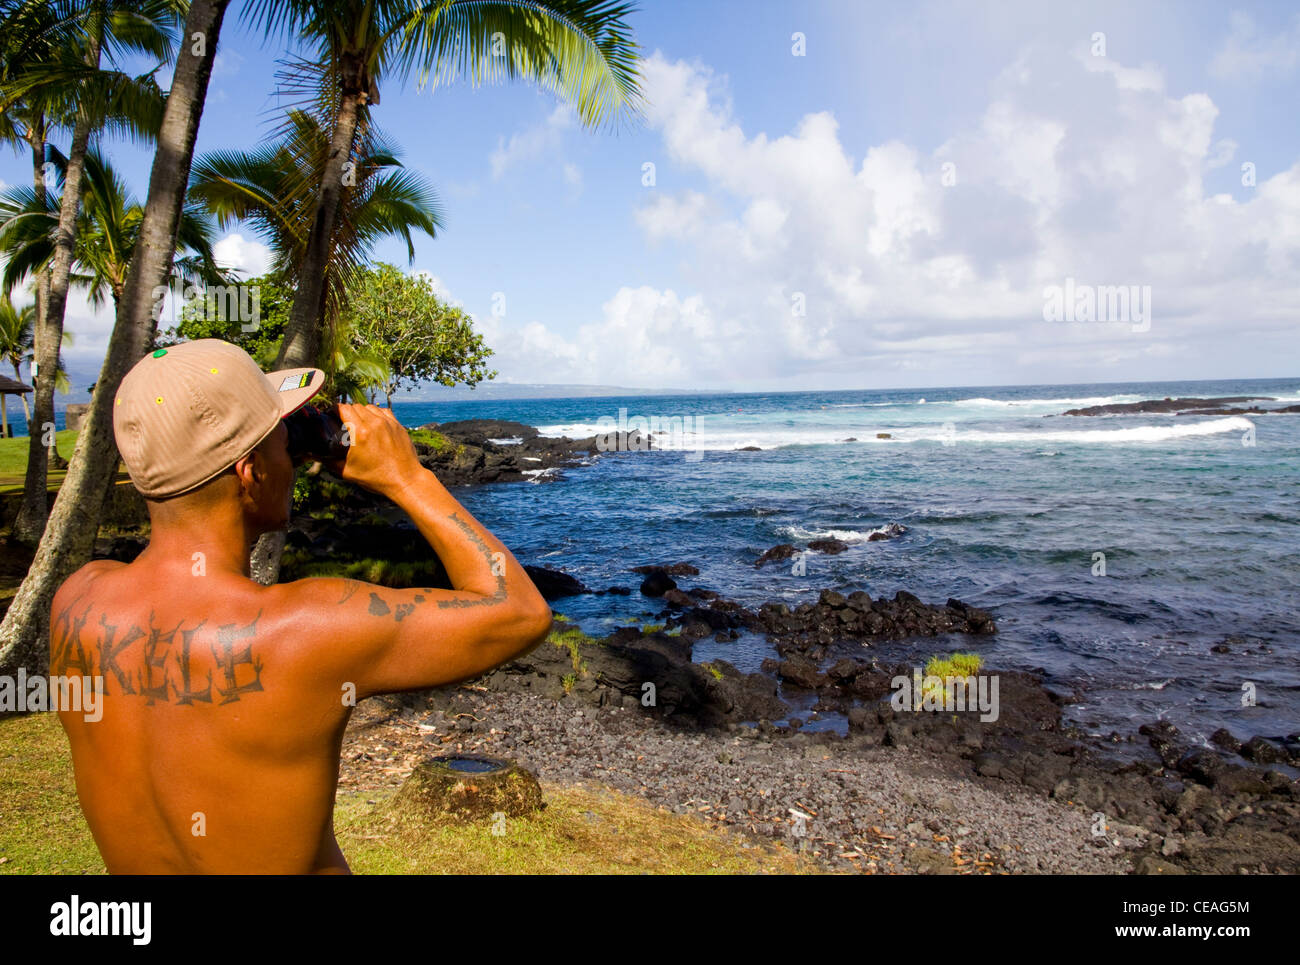 Onekahakaha Beach Park is a frequent setting for surfing contests, Hilo, Big Island, Hawaii Stock Photo